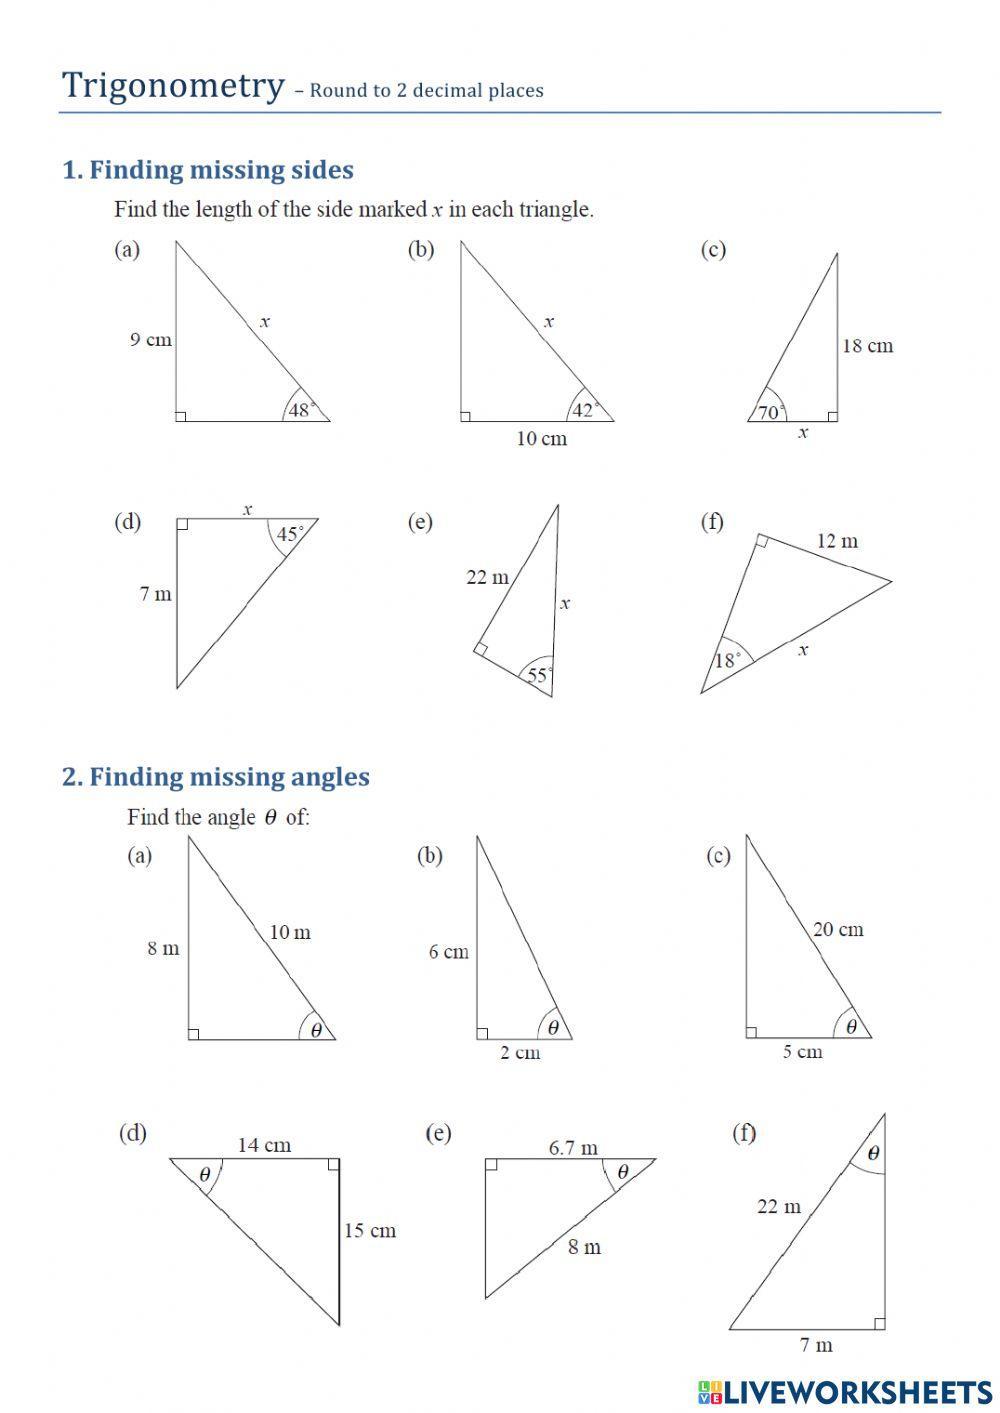 Trigonometry - Finding Sides and Angles